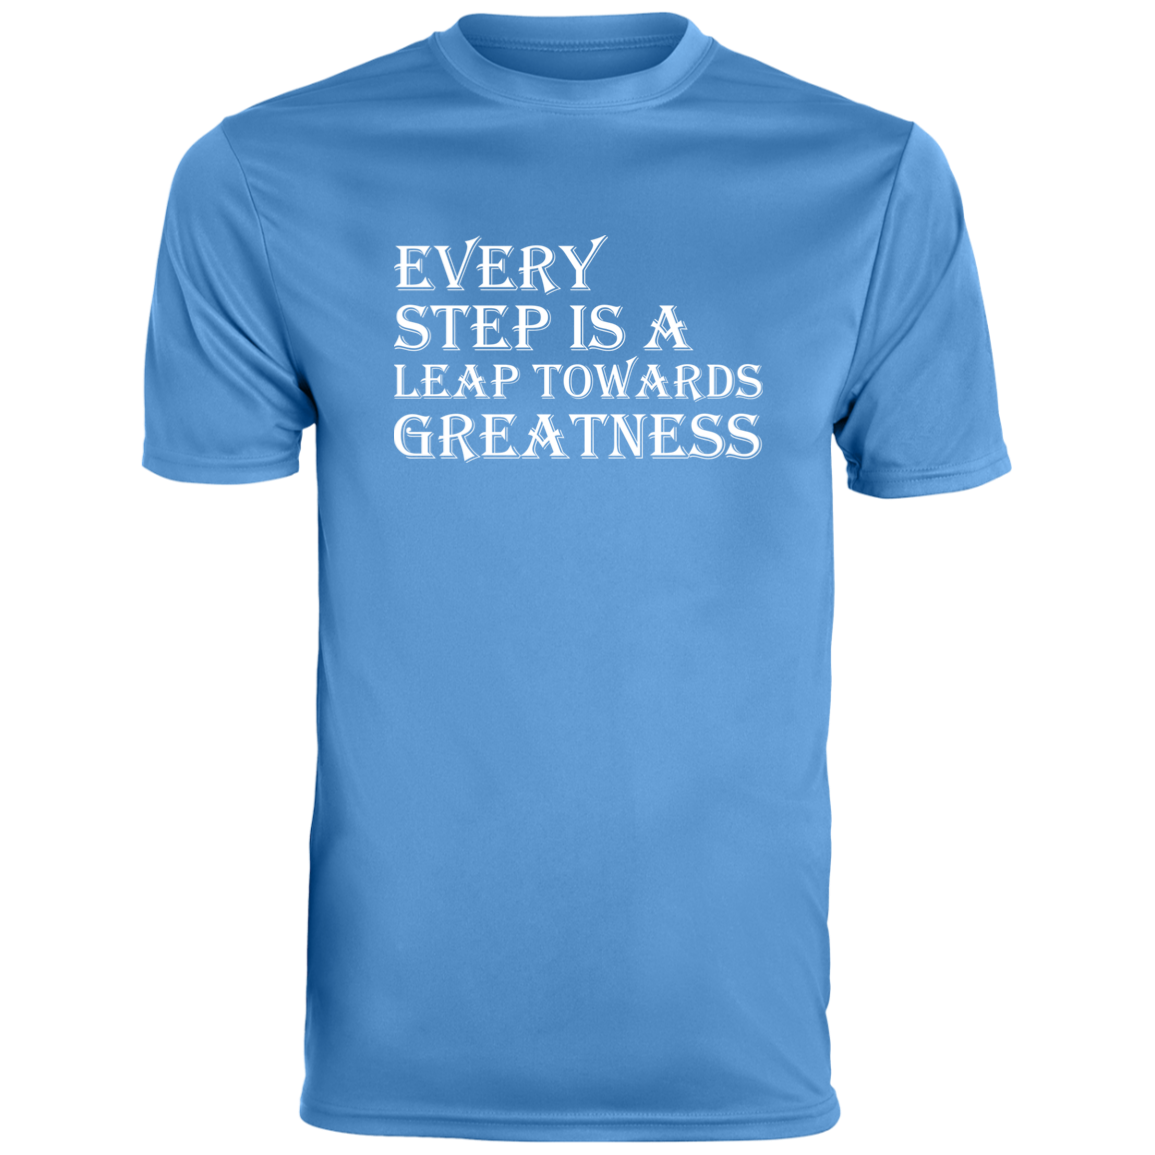 Men's Inspirational Top Every step is a leap towards greatness